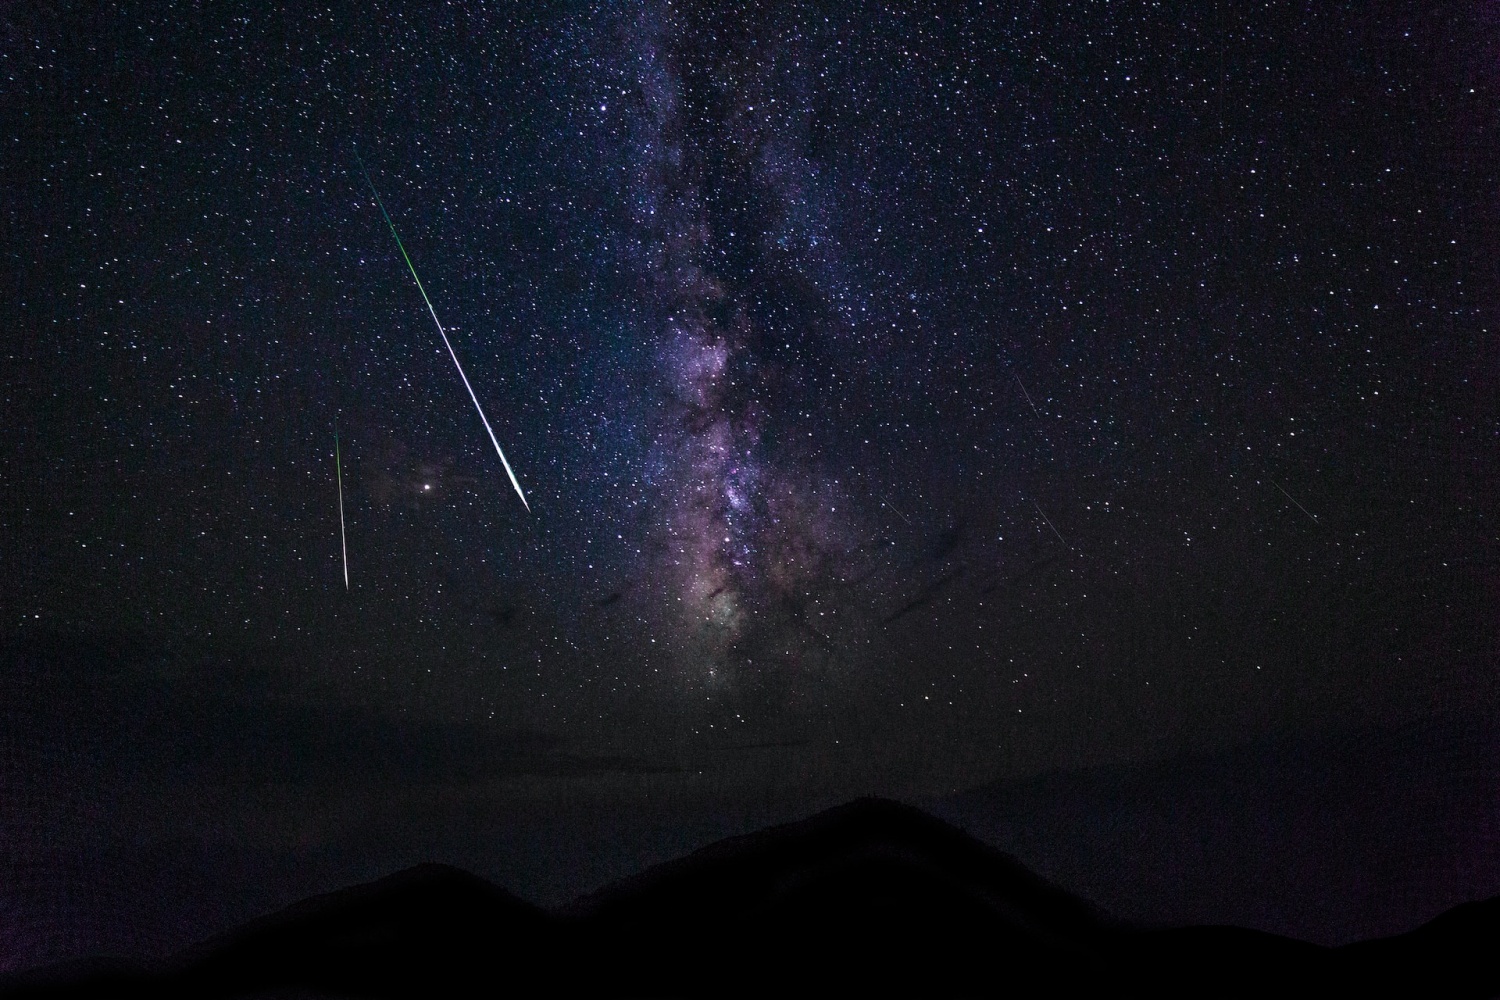 [LOOK] Orionid Meteor Shower is Coming This Weekend: Here's How to Watch it